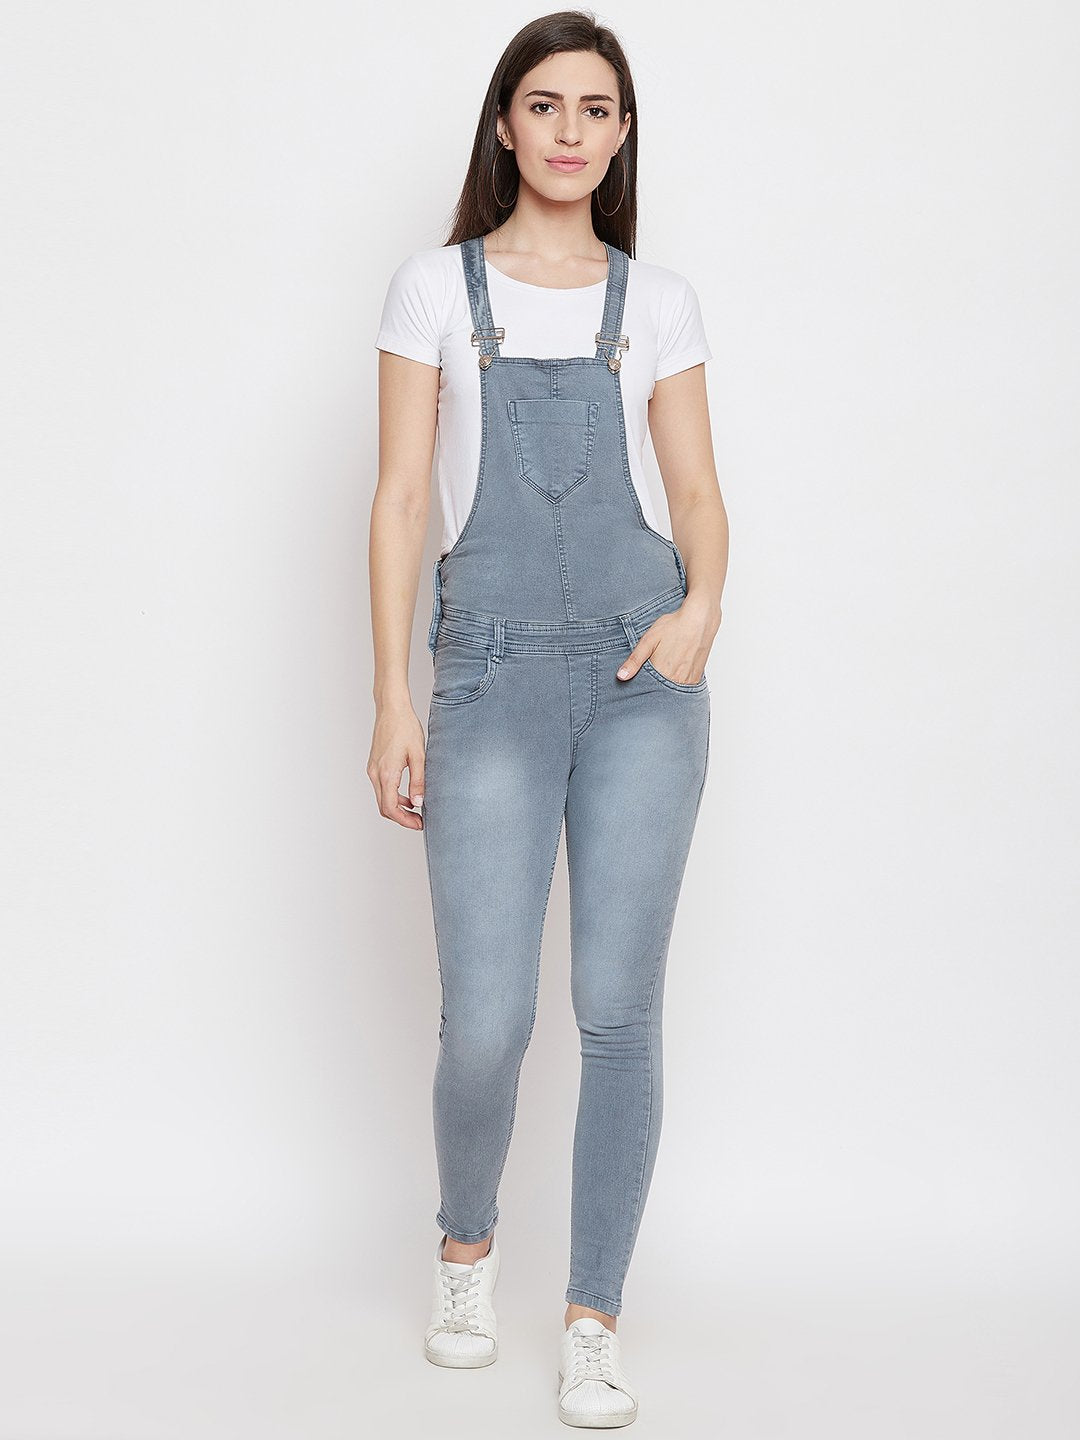 Slim Fit Stretchable Grey Dungarees - NiftyJeans